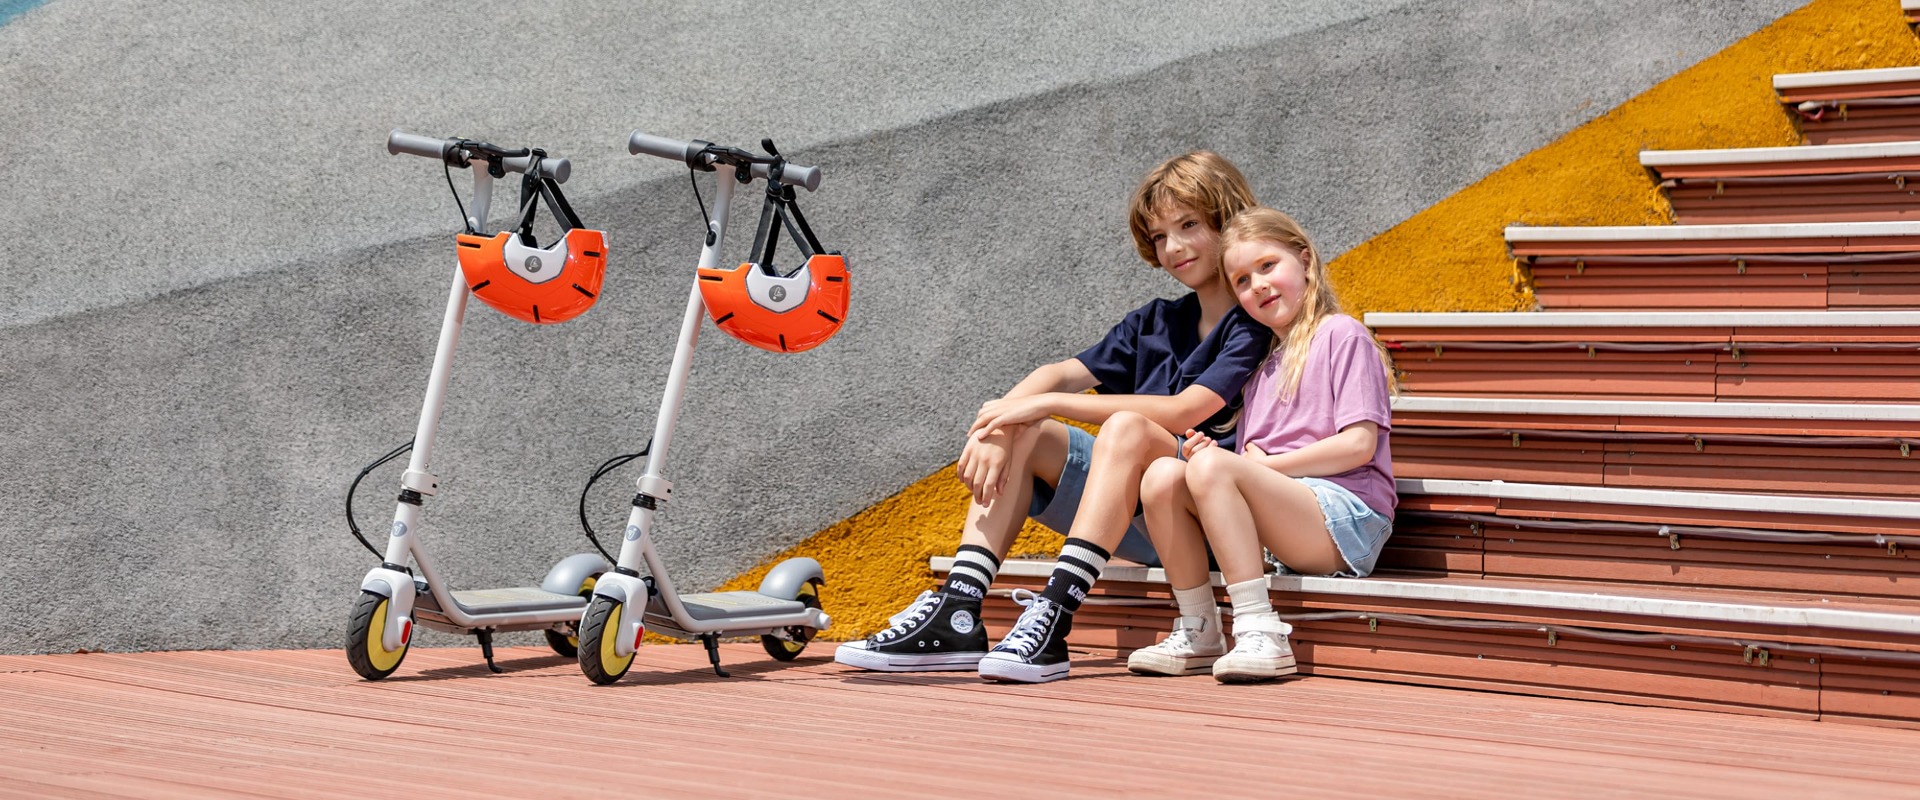 C8 Scooter Product Image